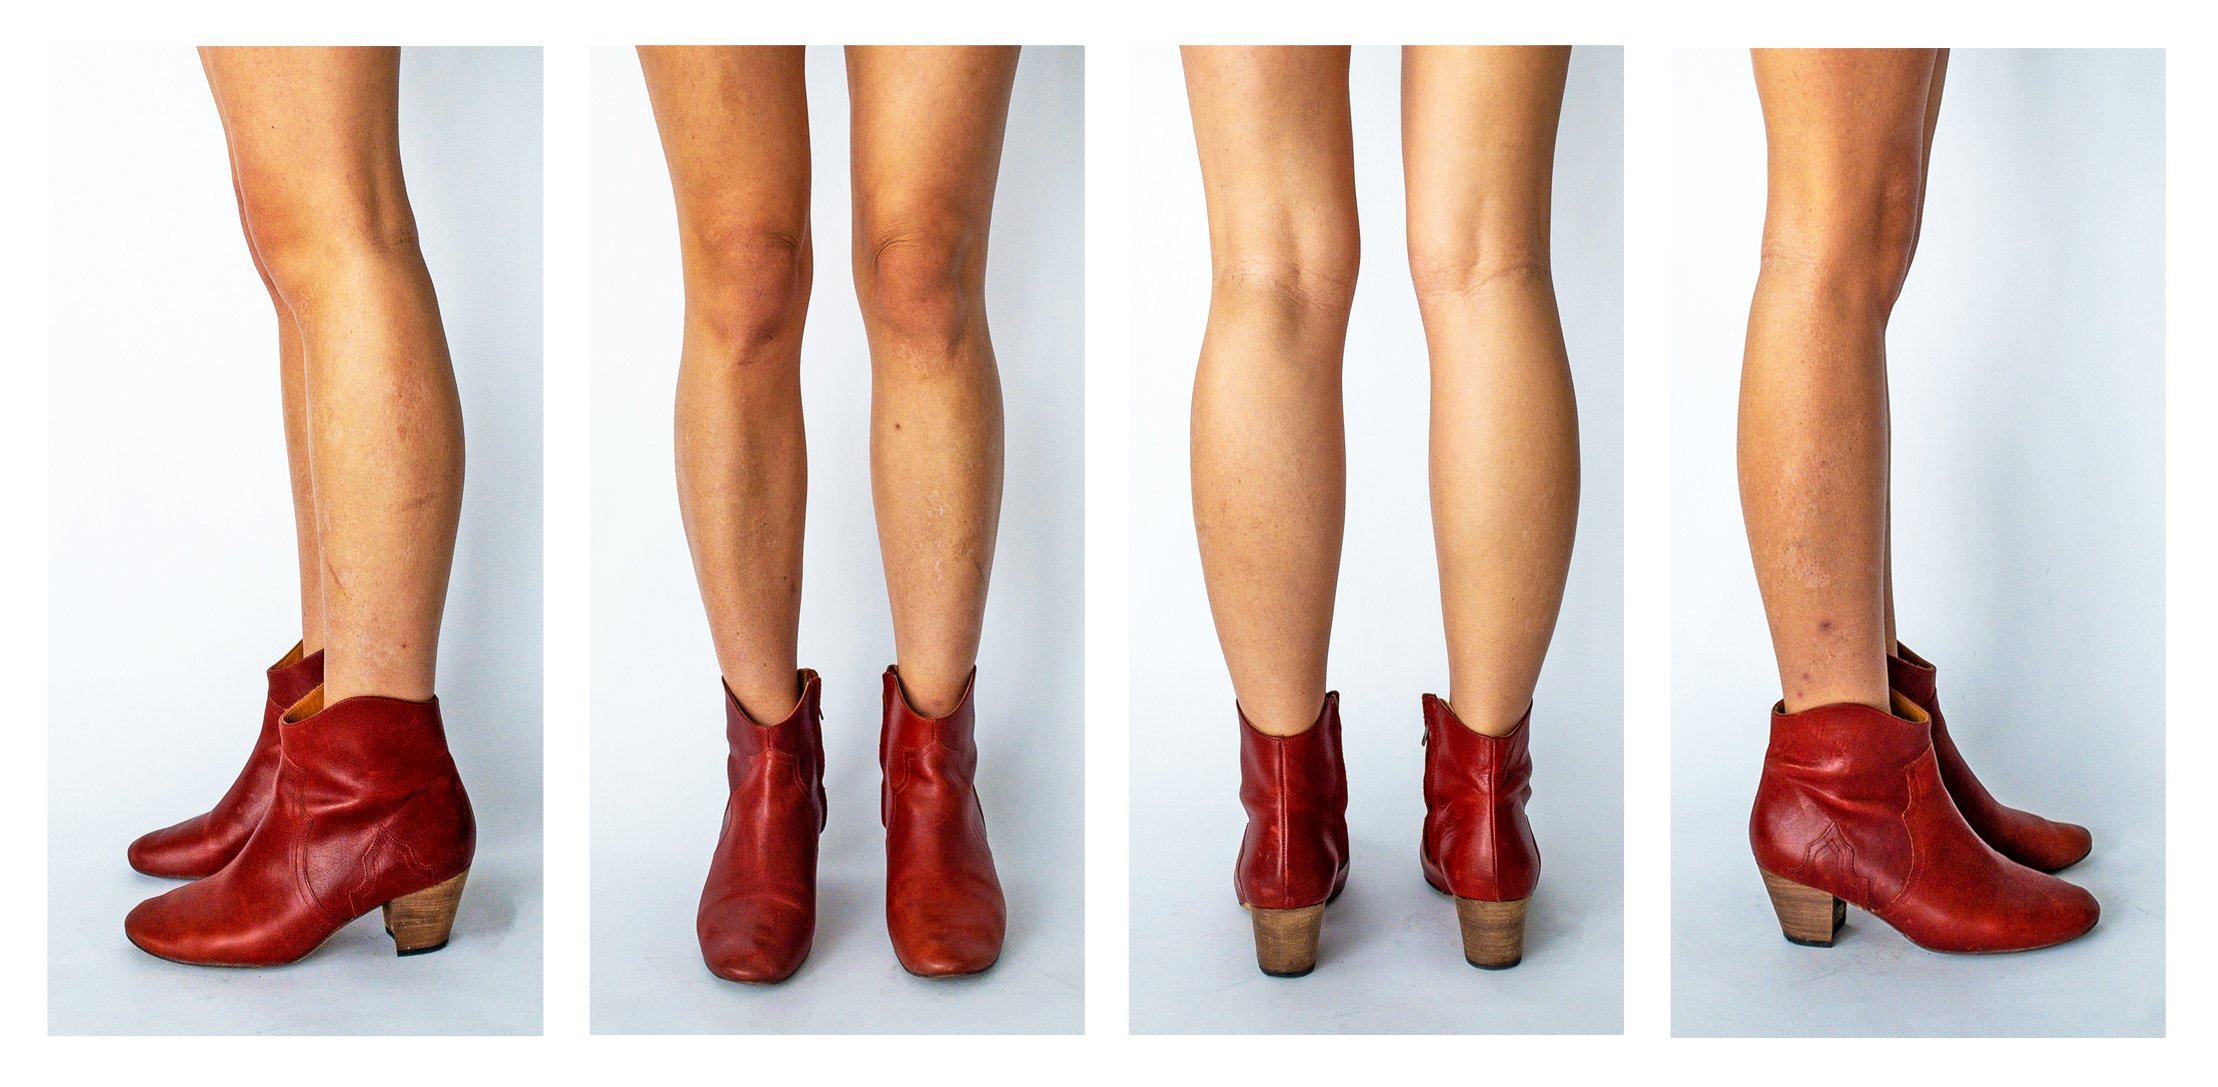 isabel marant red boots